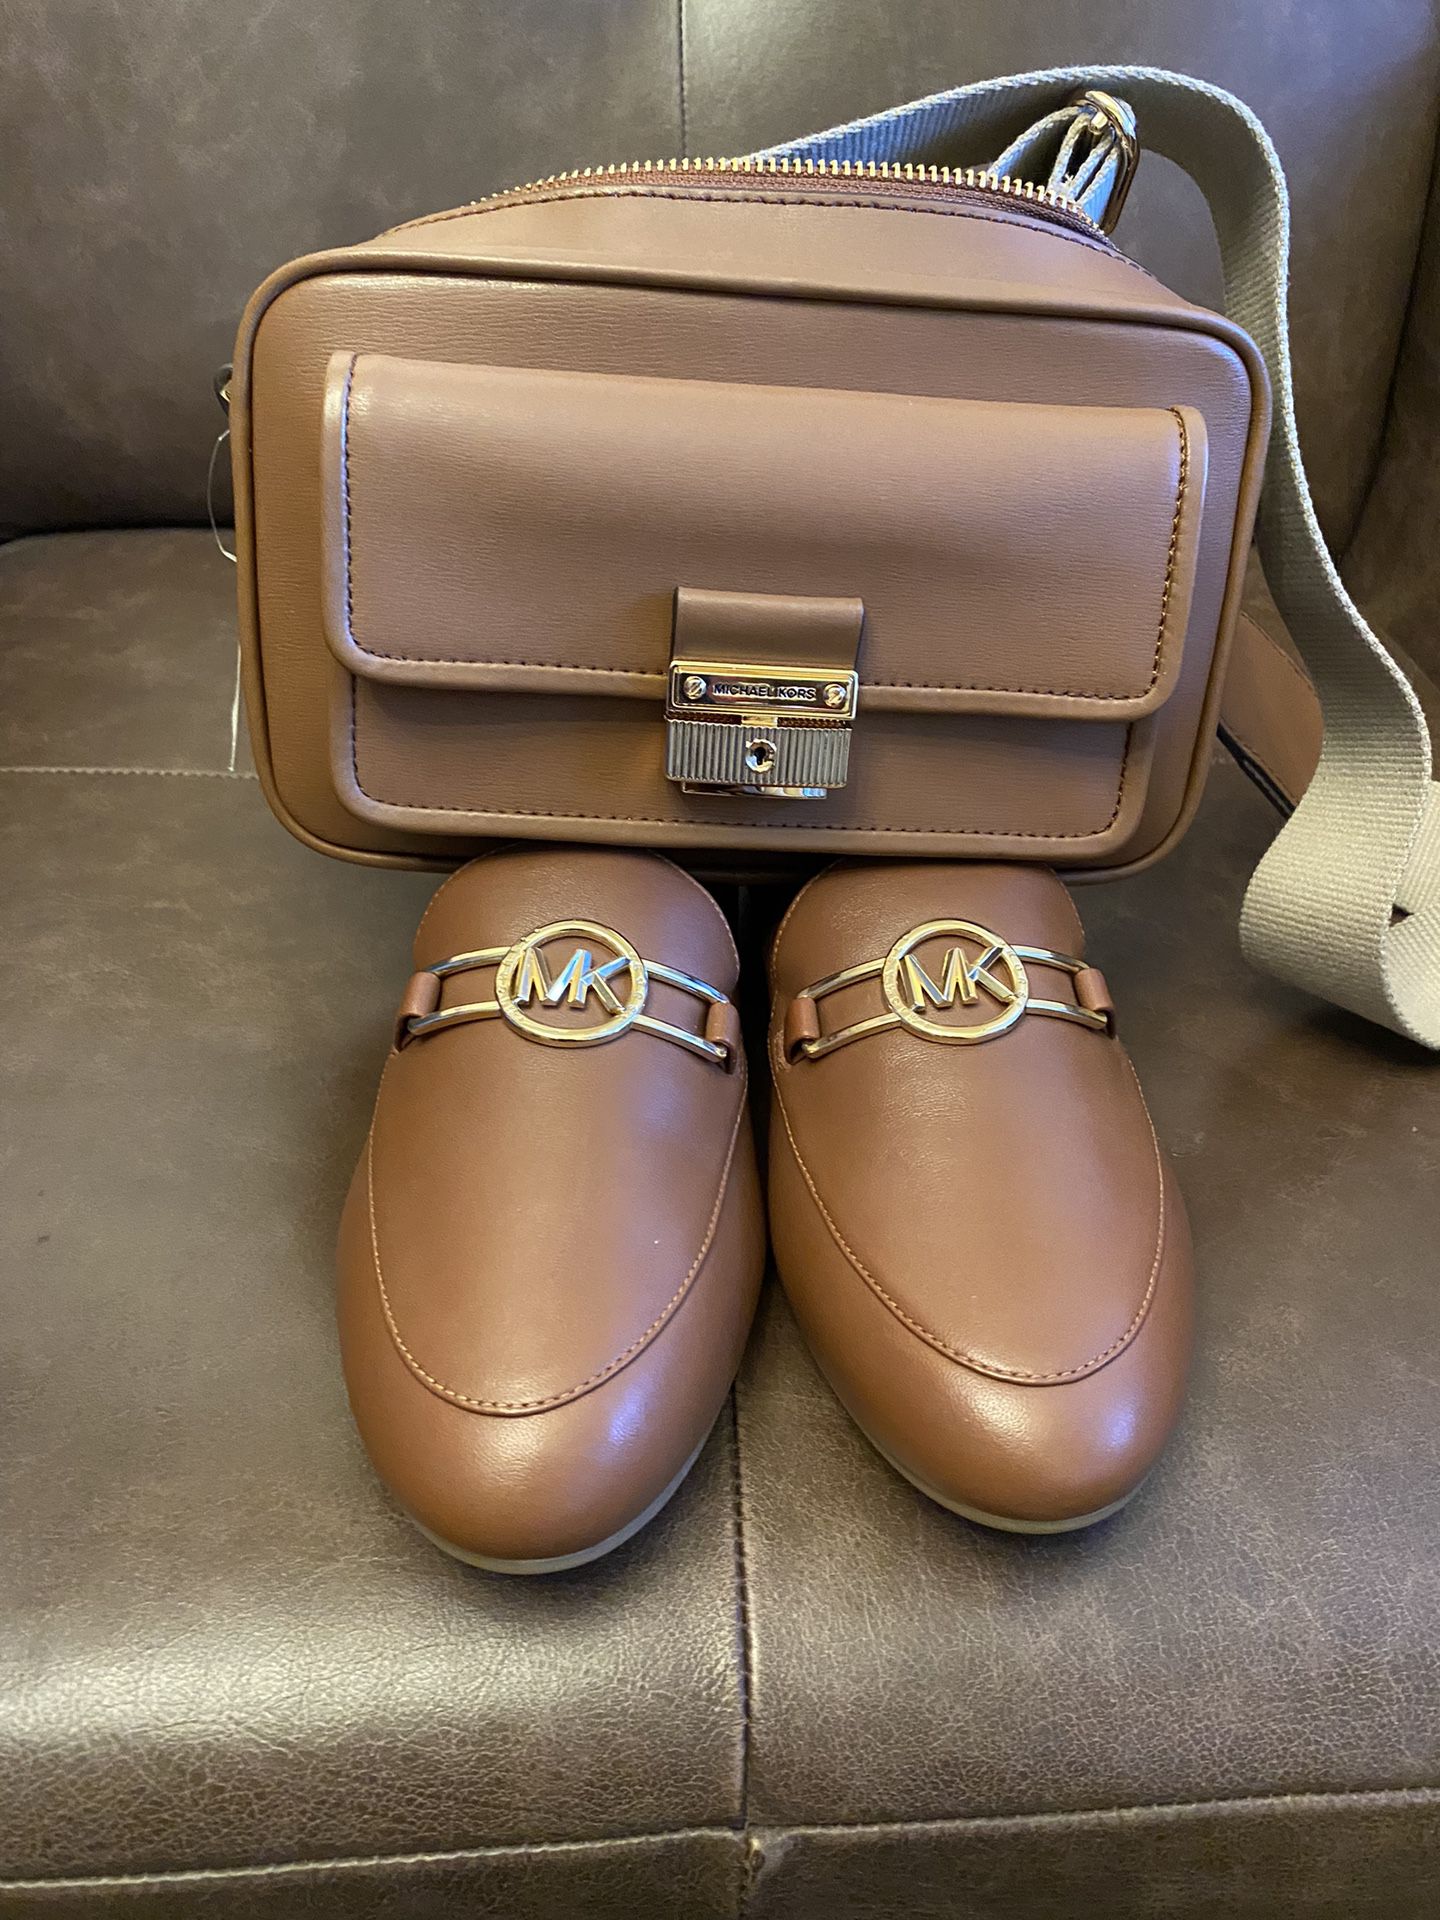 A Louis Vuitton purse for Sale in Henderson, NV - OfferUp